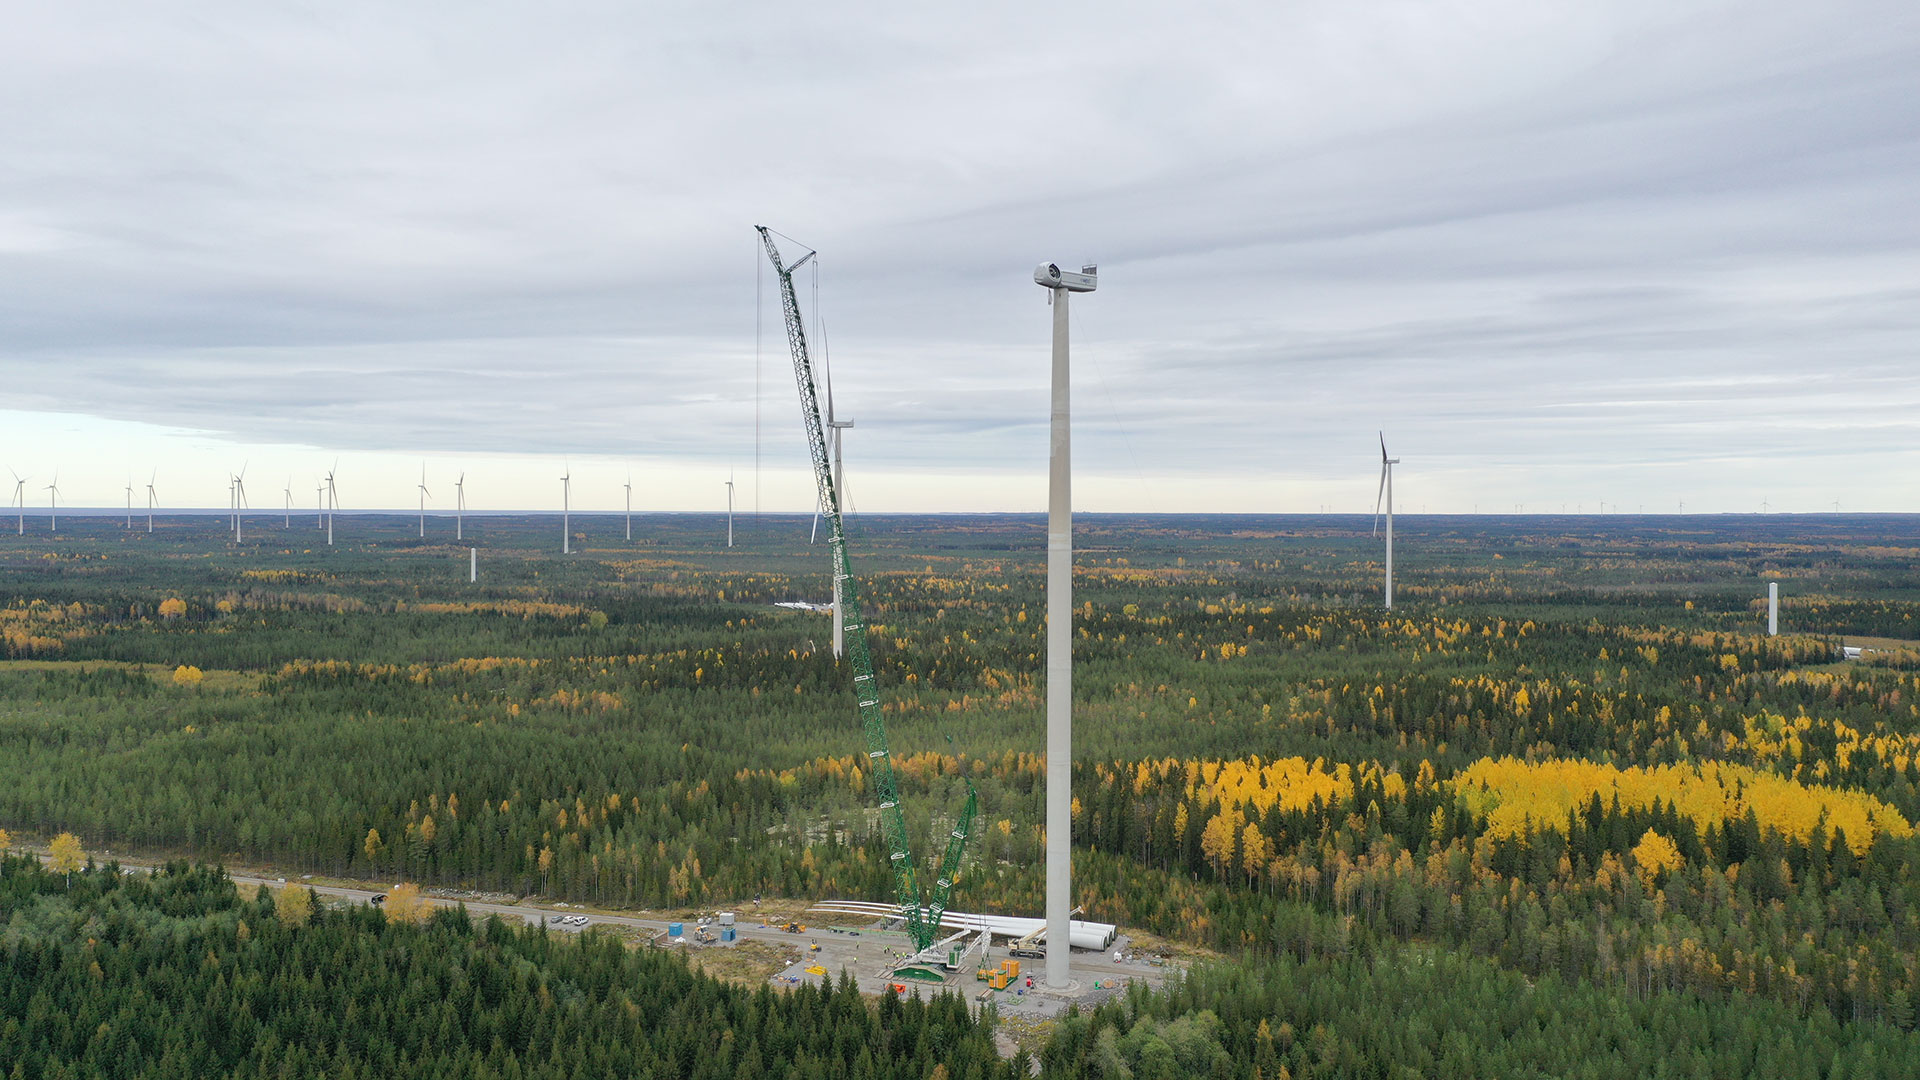 Finnish wind farm will supply UPM paper mills with renewable energy